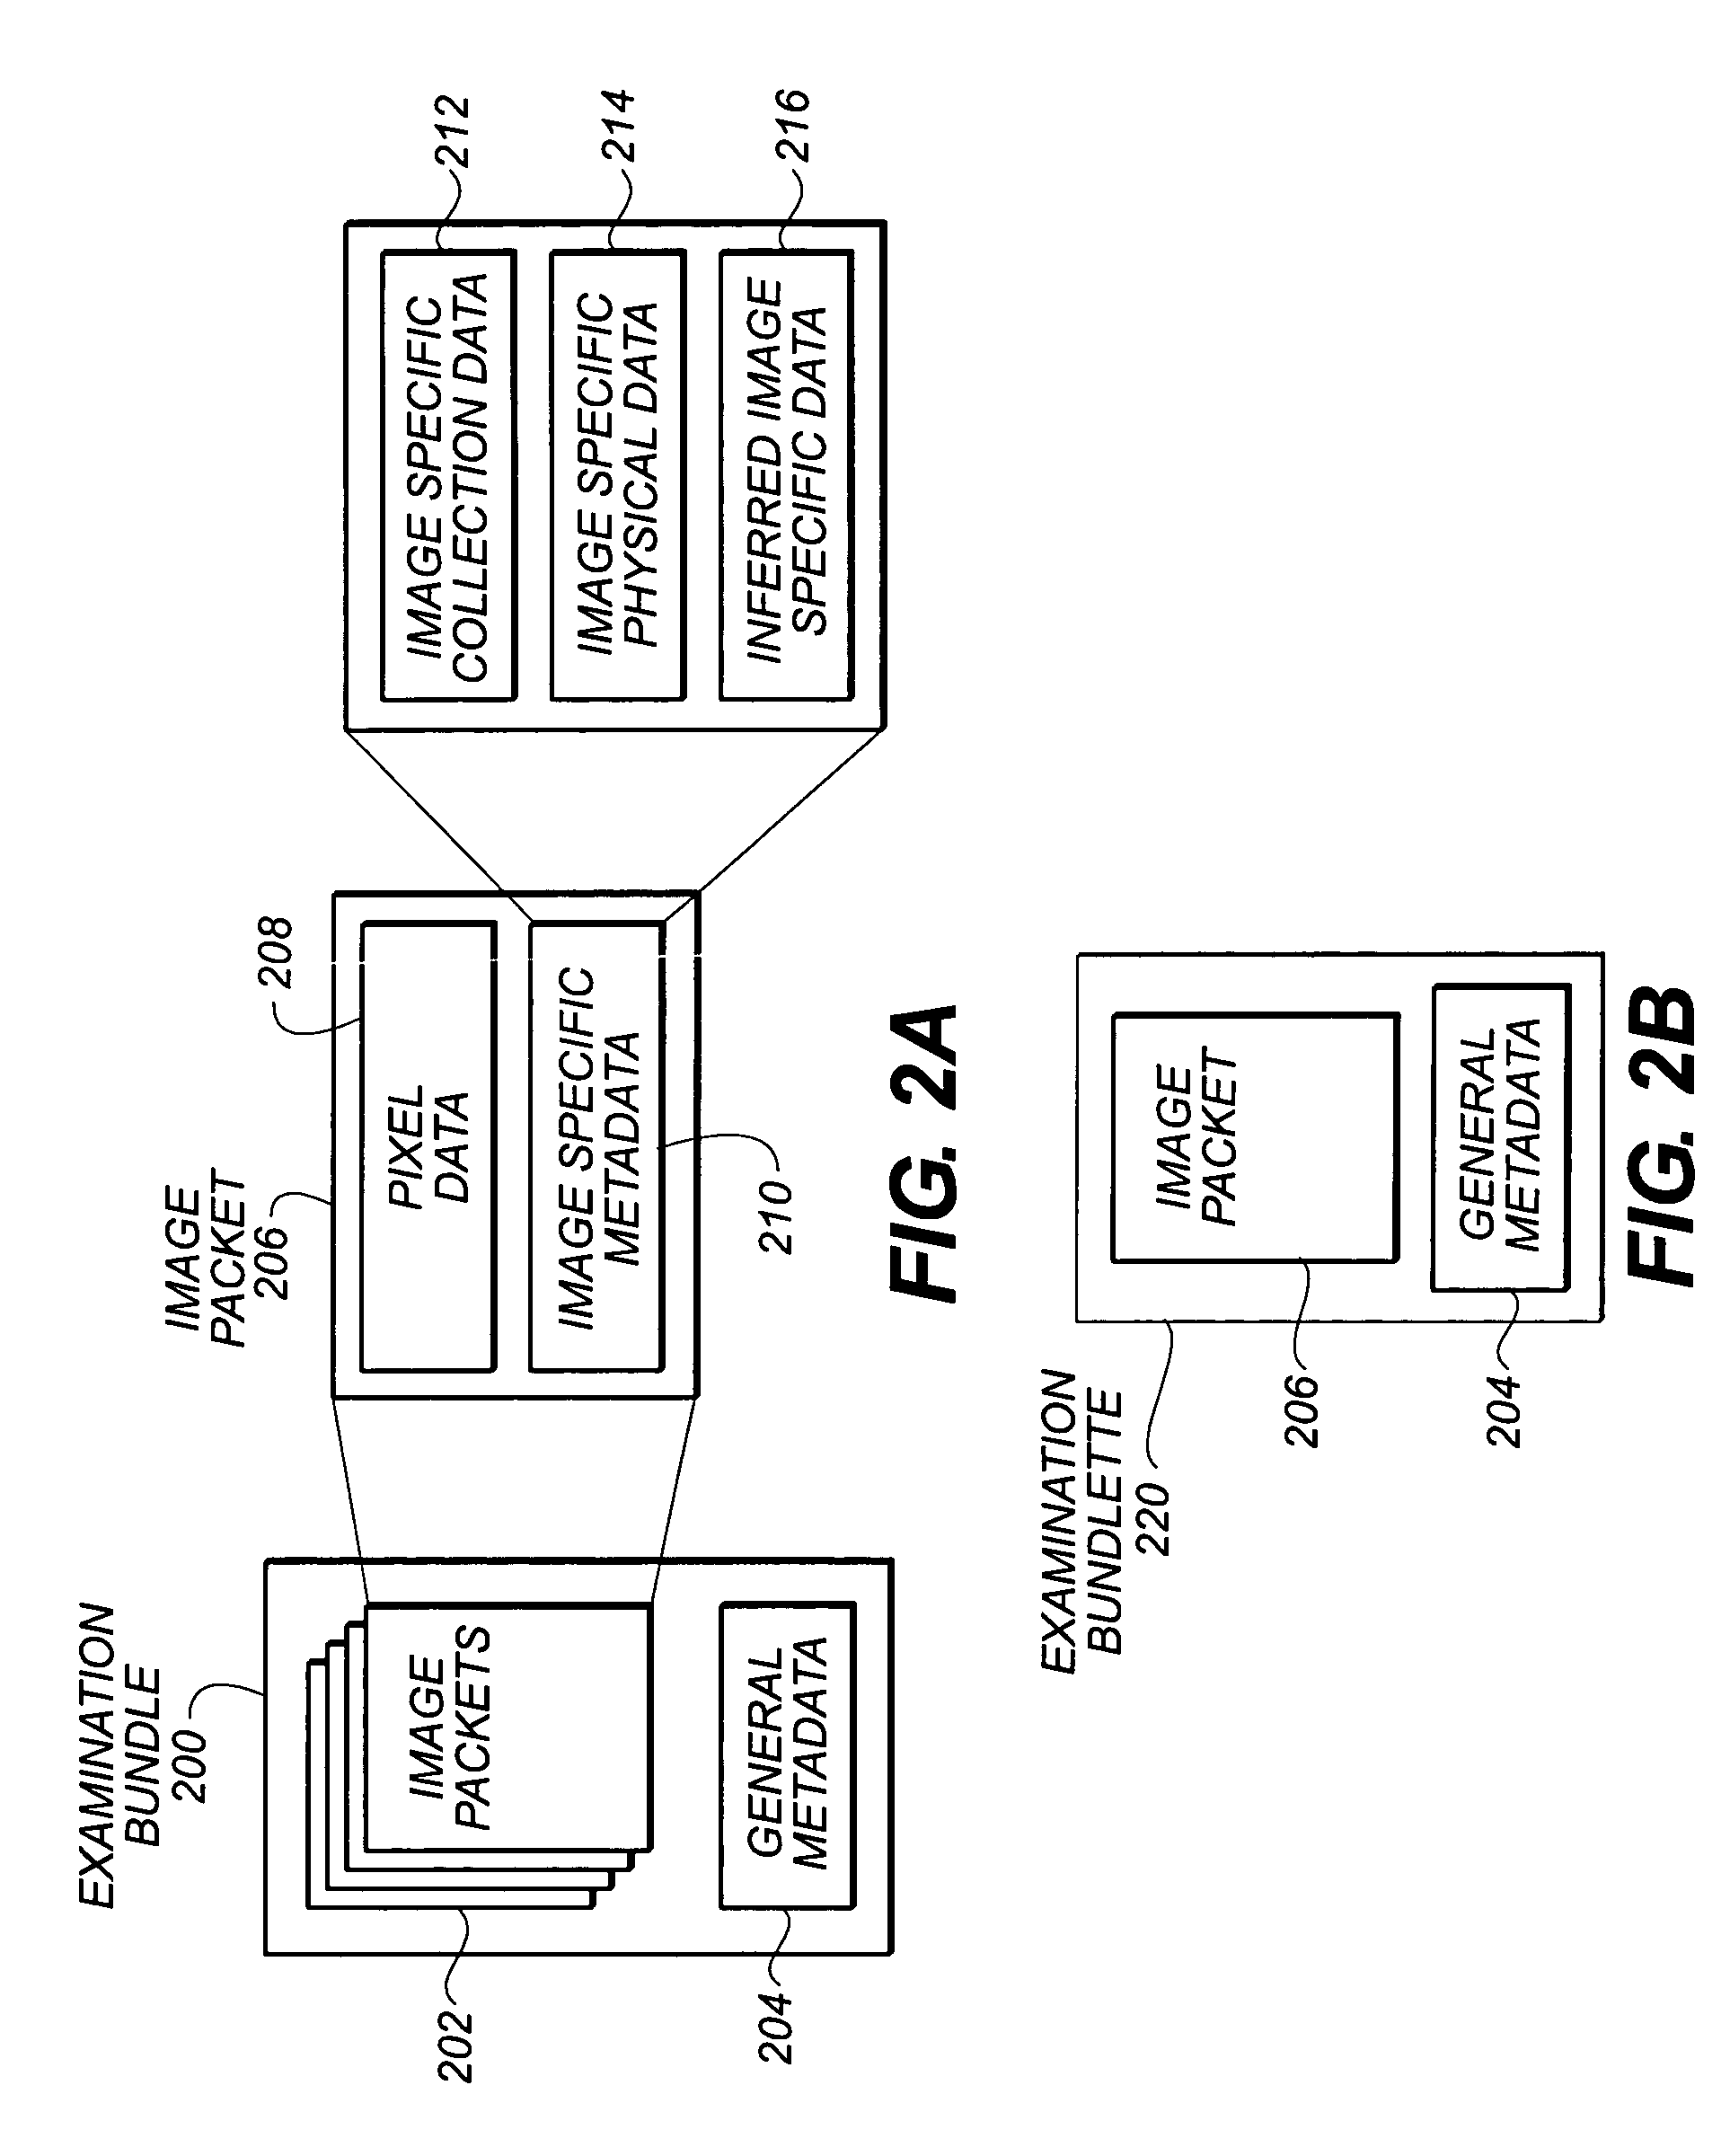 Method and system for automatic image adjustment for in vivo image diagnosis